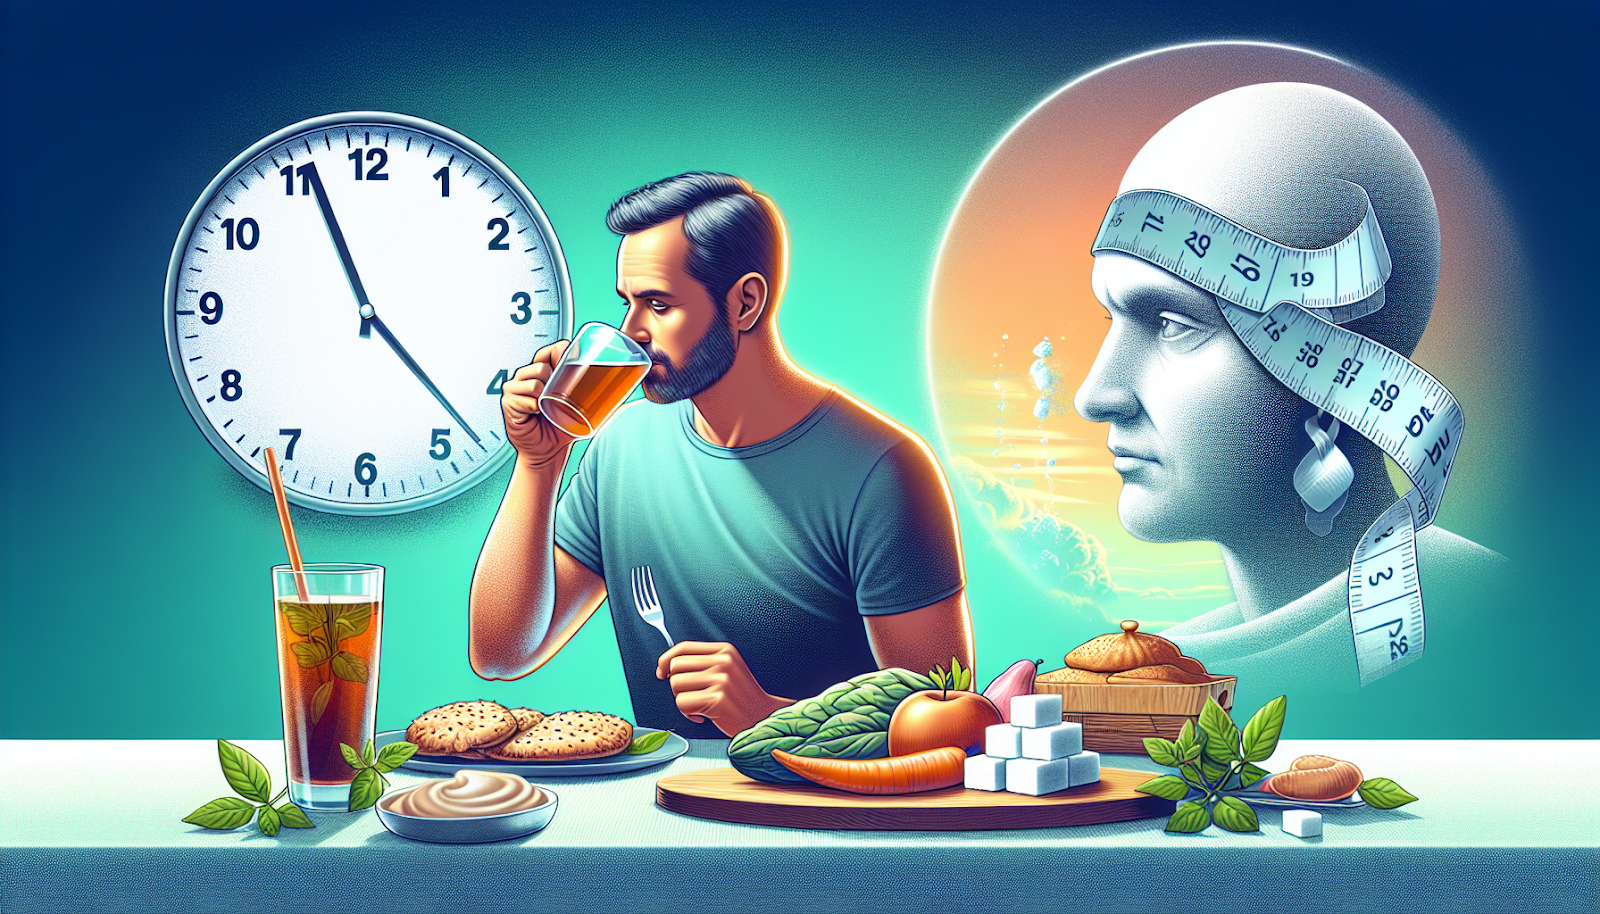 Illustration of a person practicing intermittent fasting